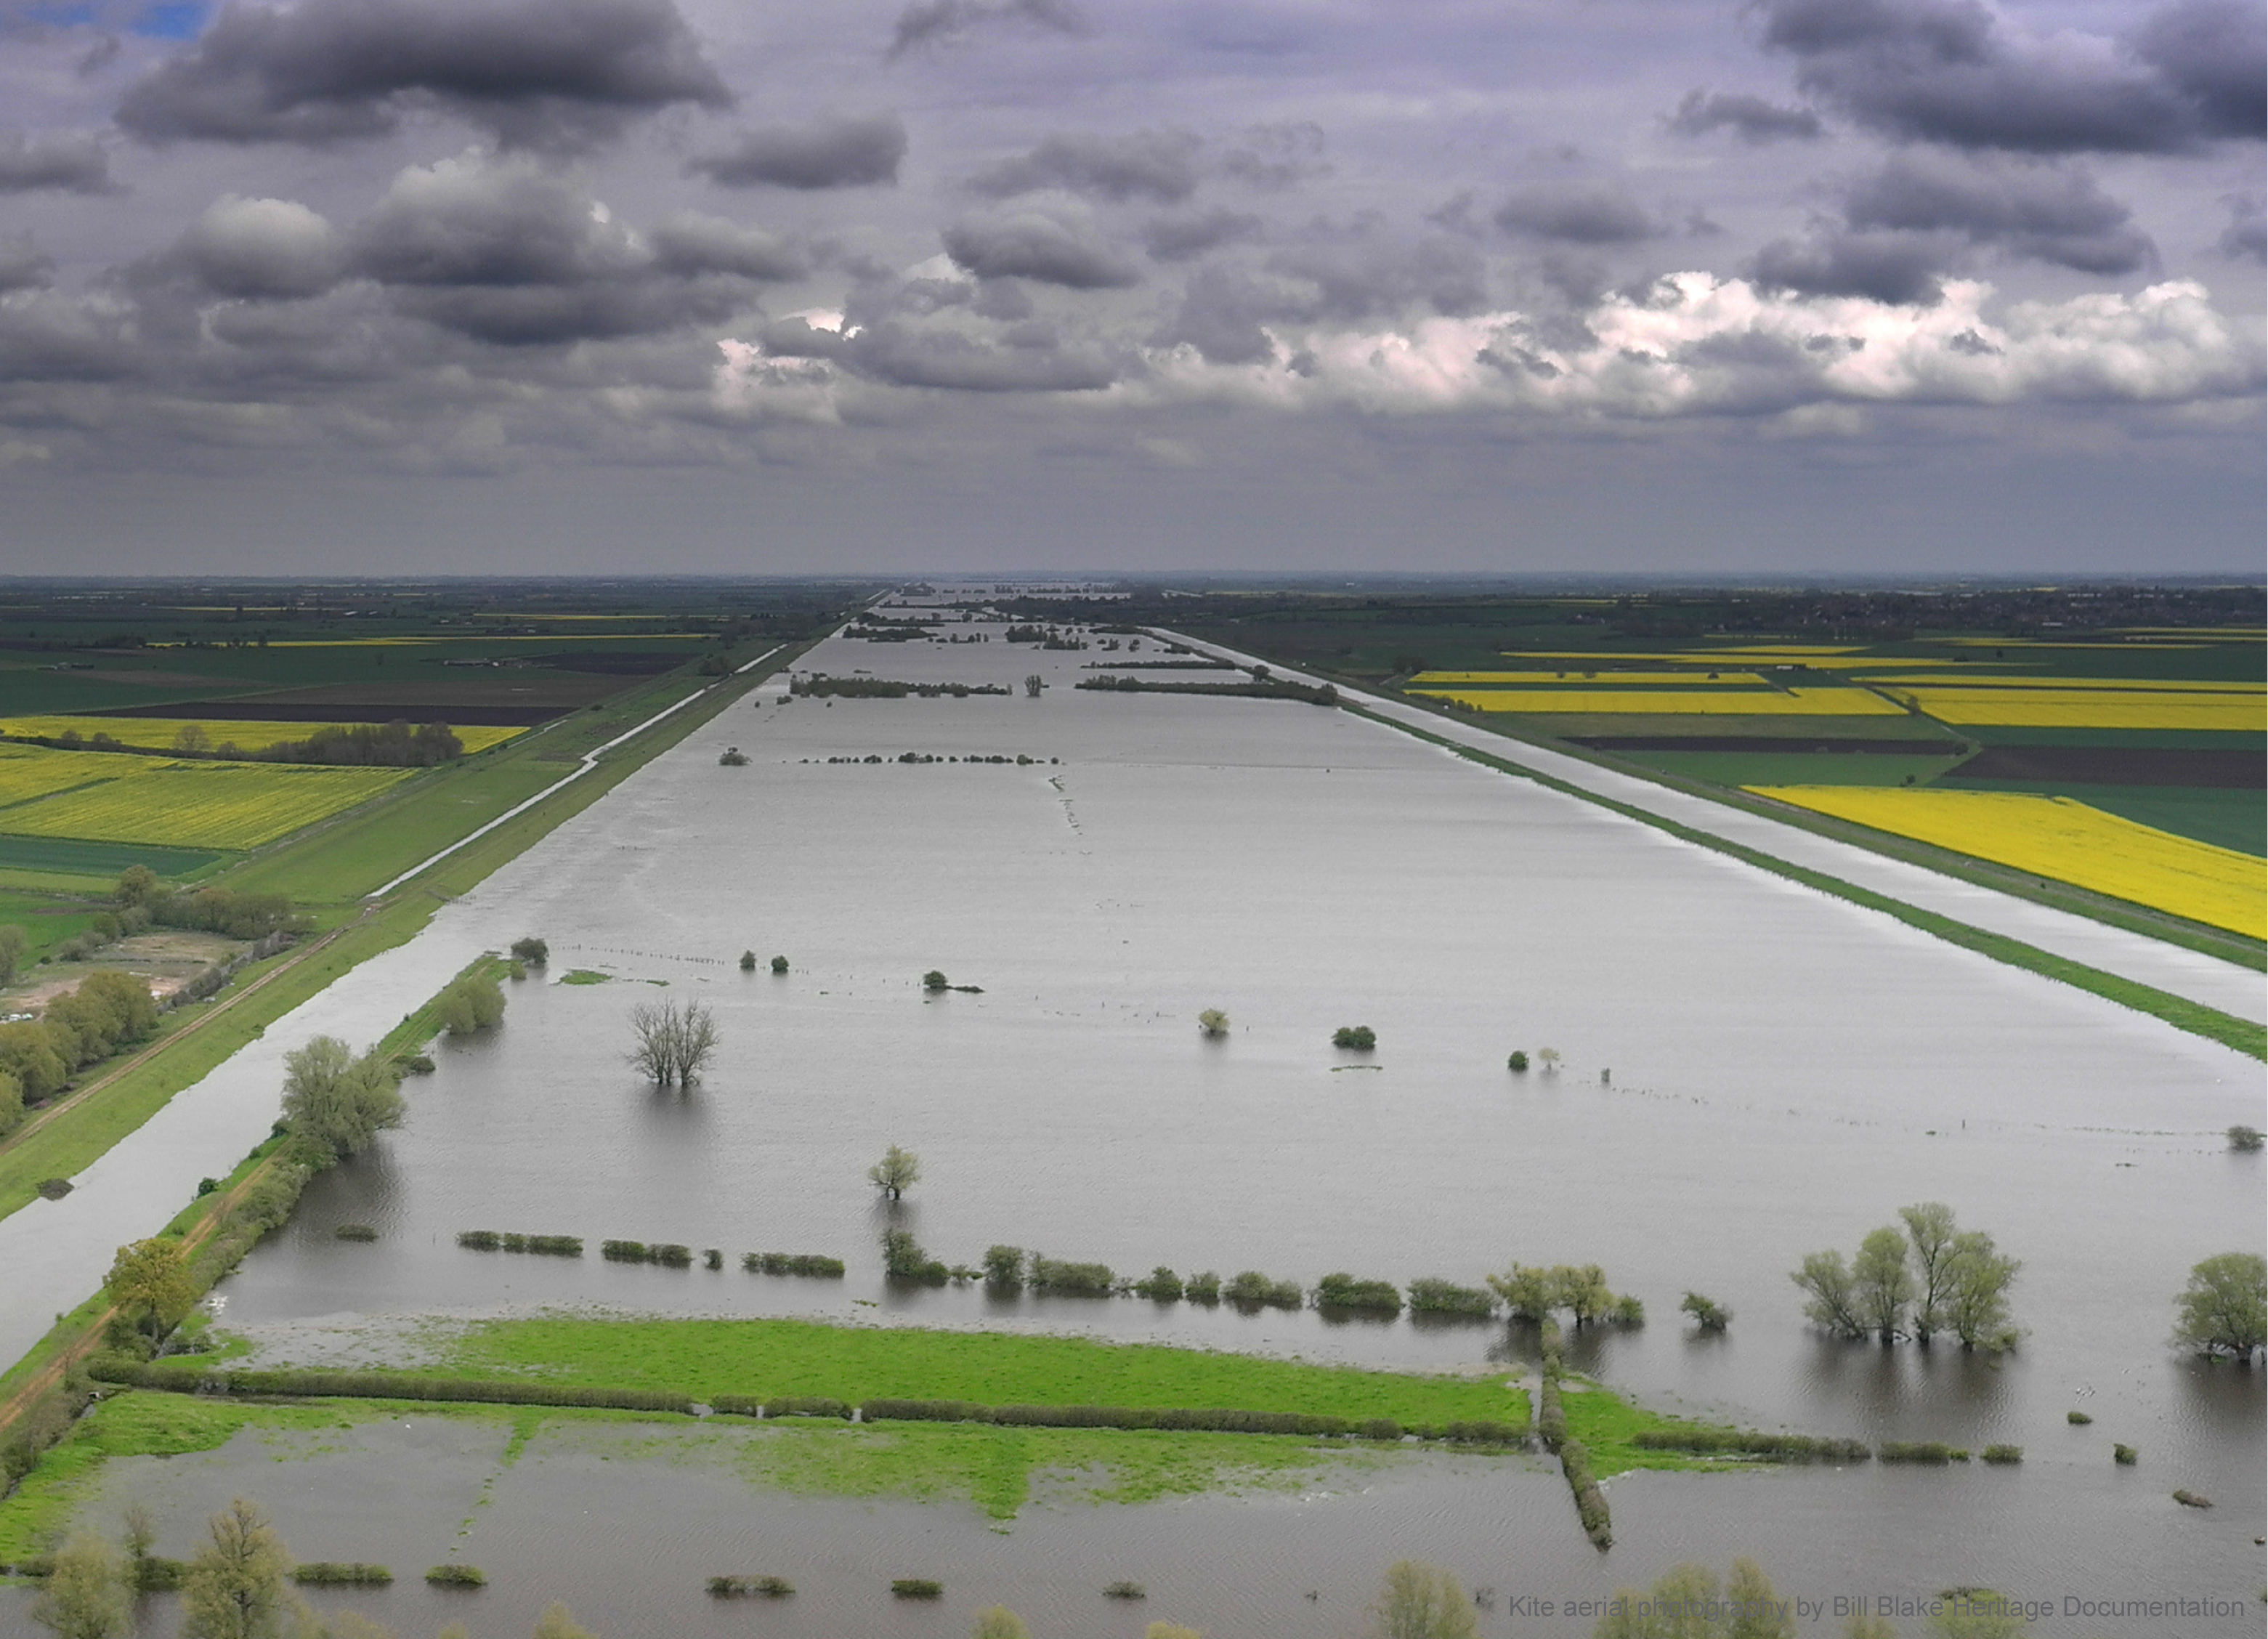 Ouse Washes in full flood